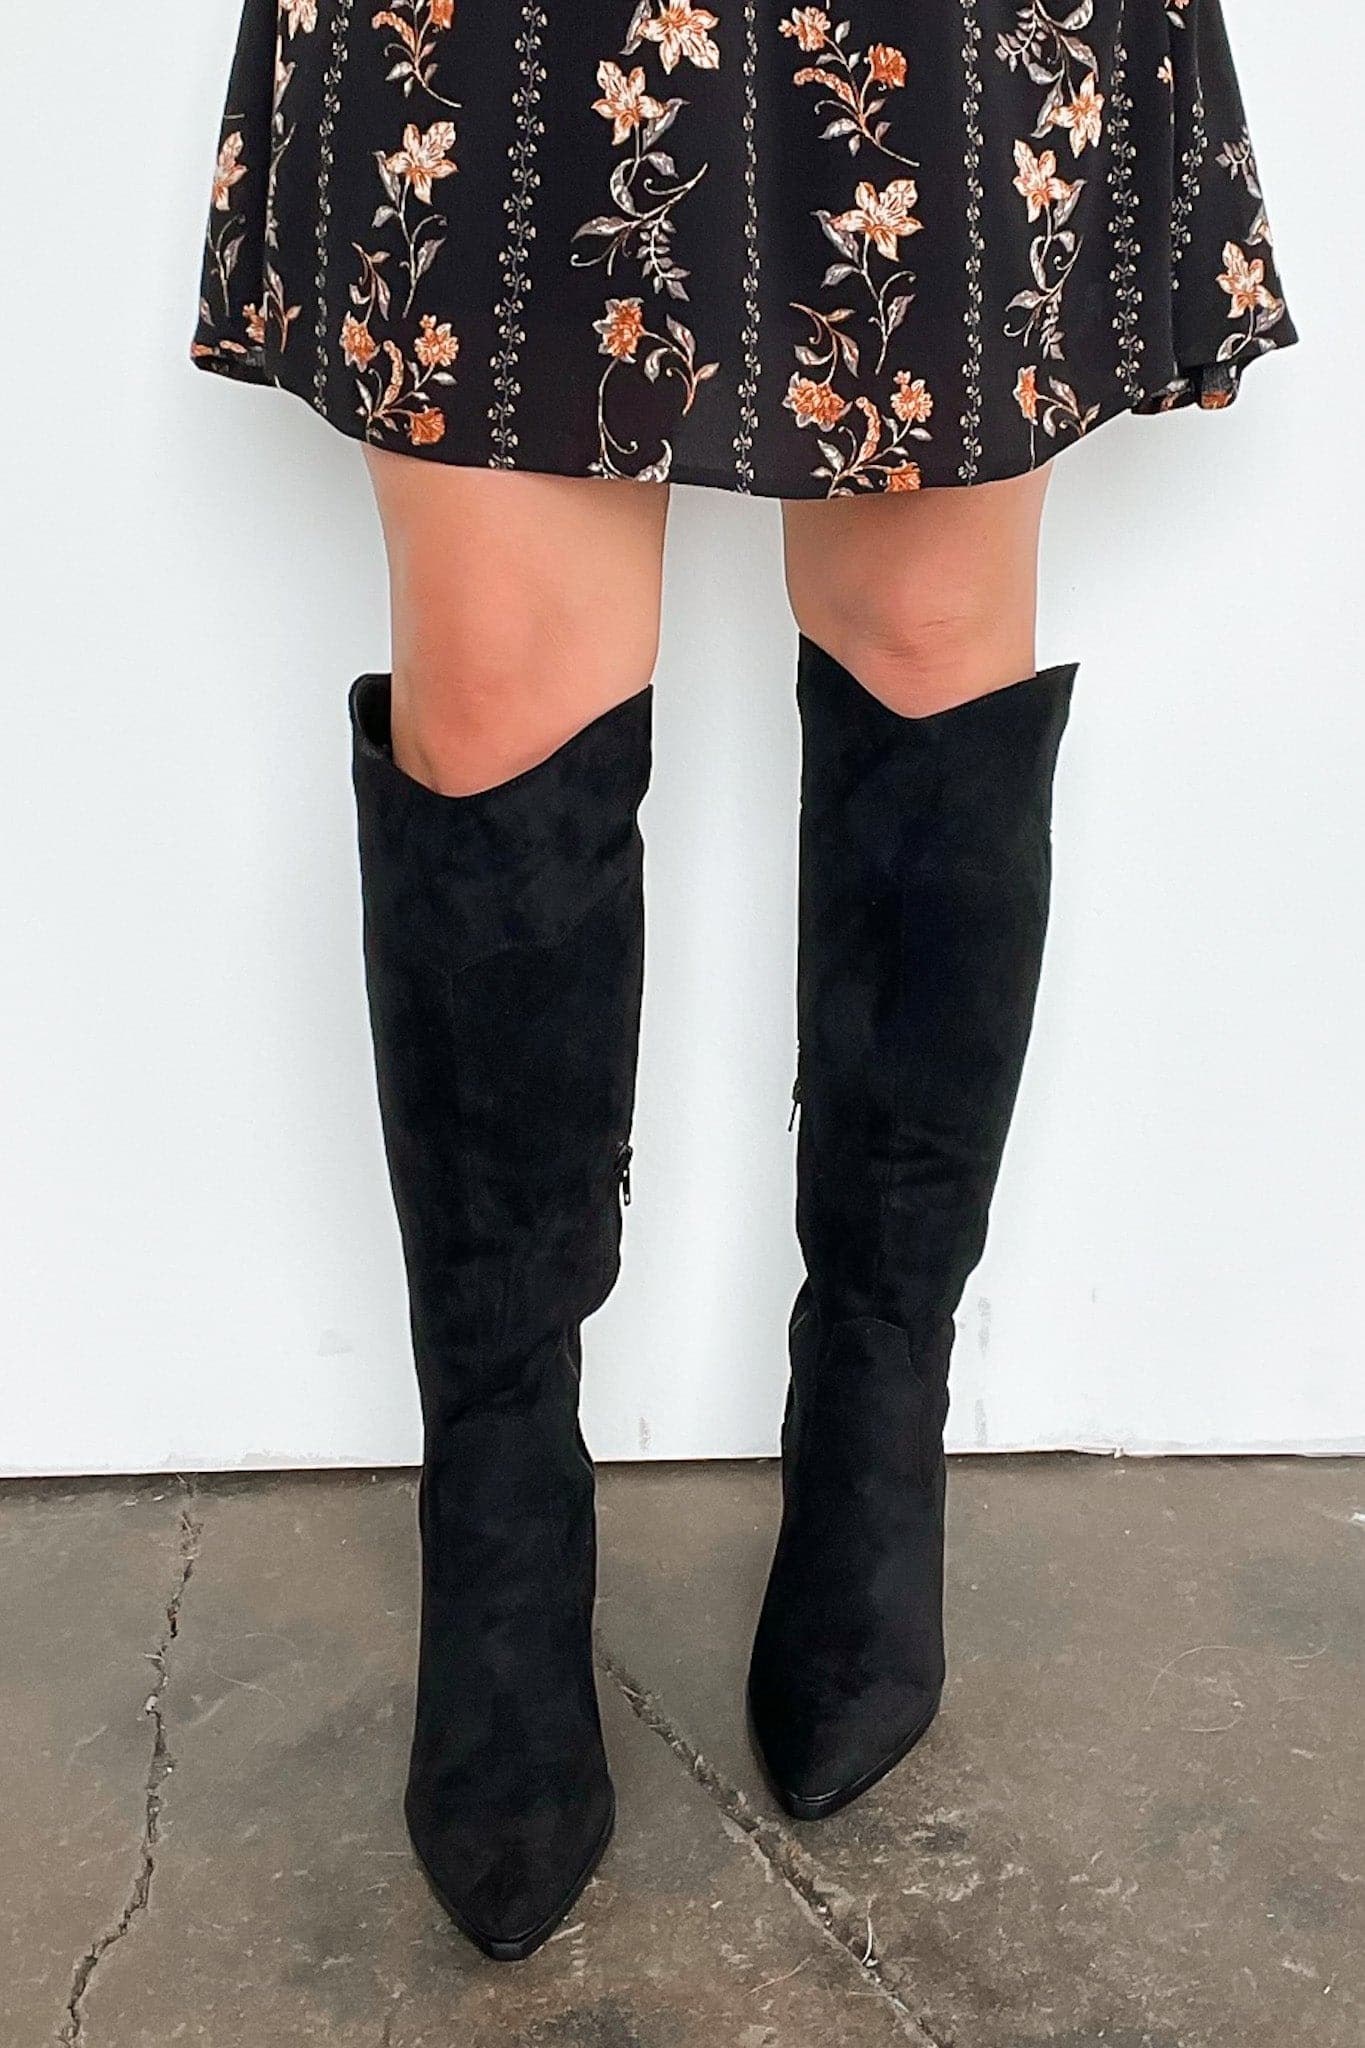  Raynna Western Stitch Faux Suede Boots - FINAL SALE - Madison and Mallory